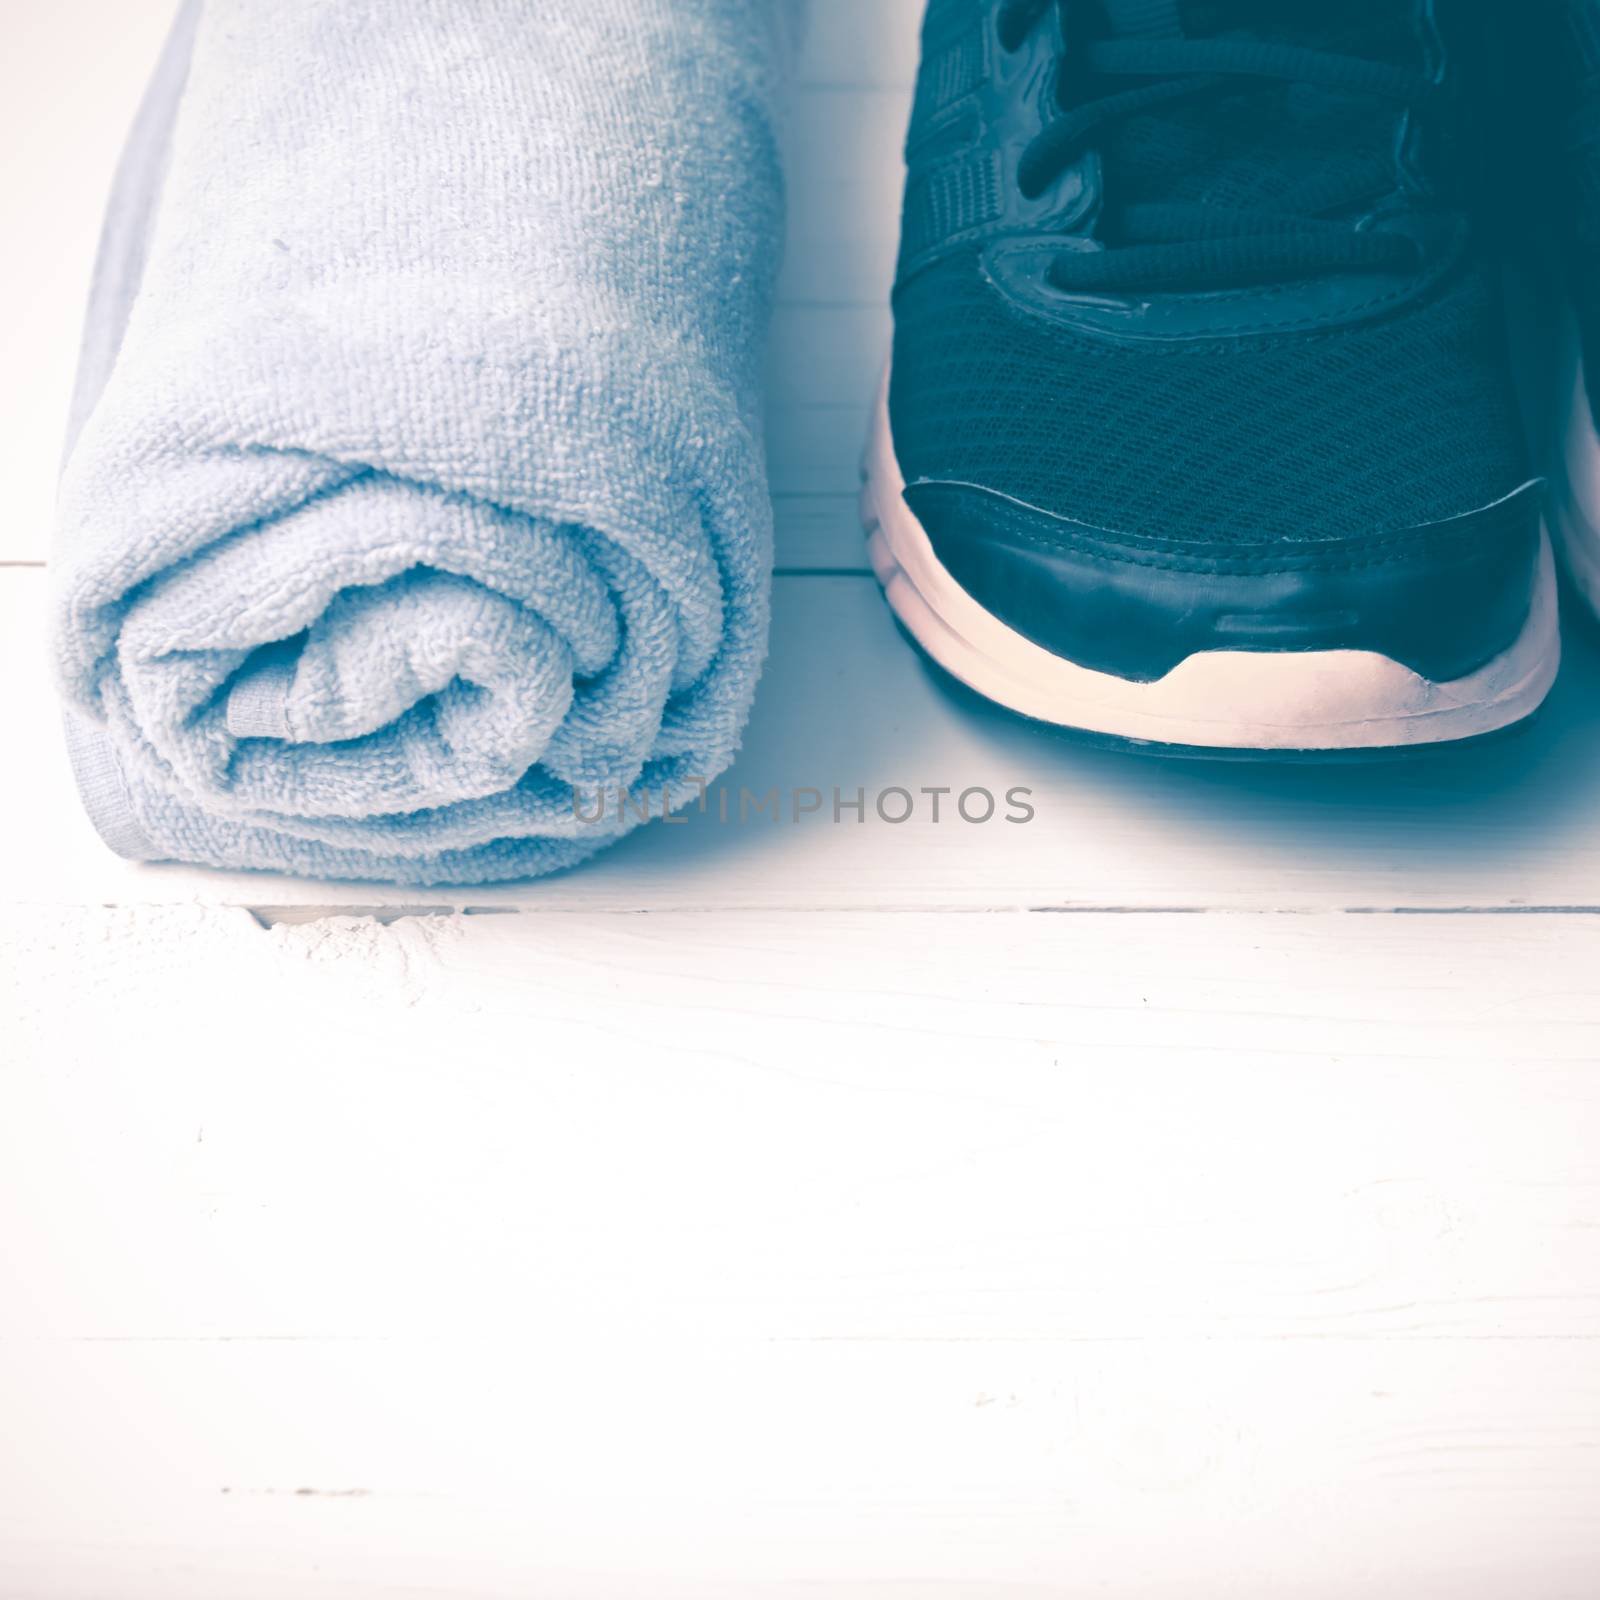 running shoes and towel vintage style by ammza12